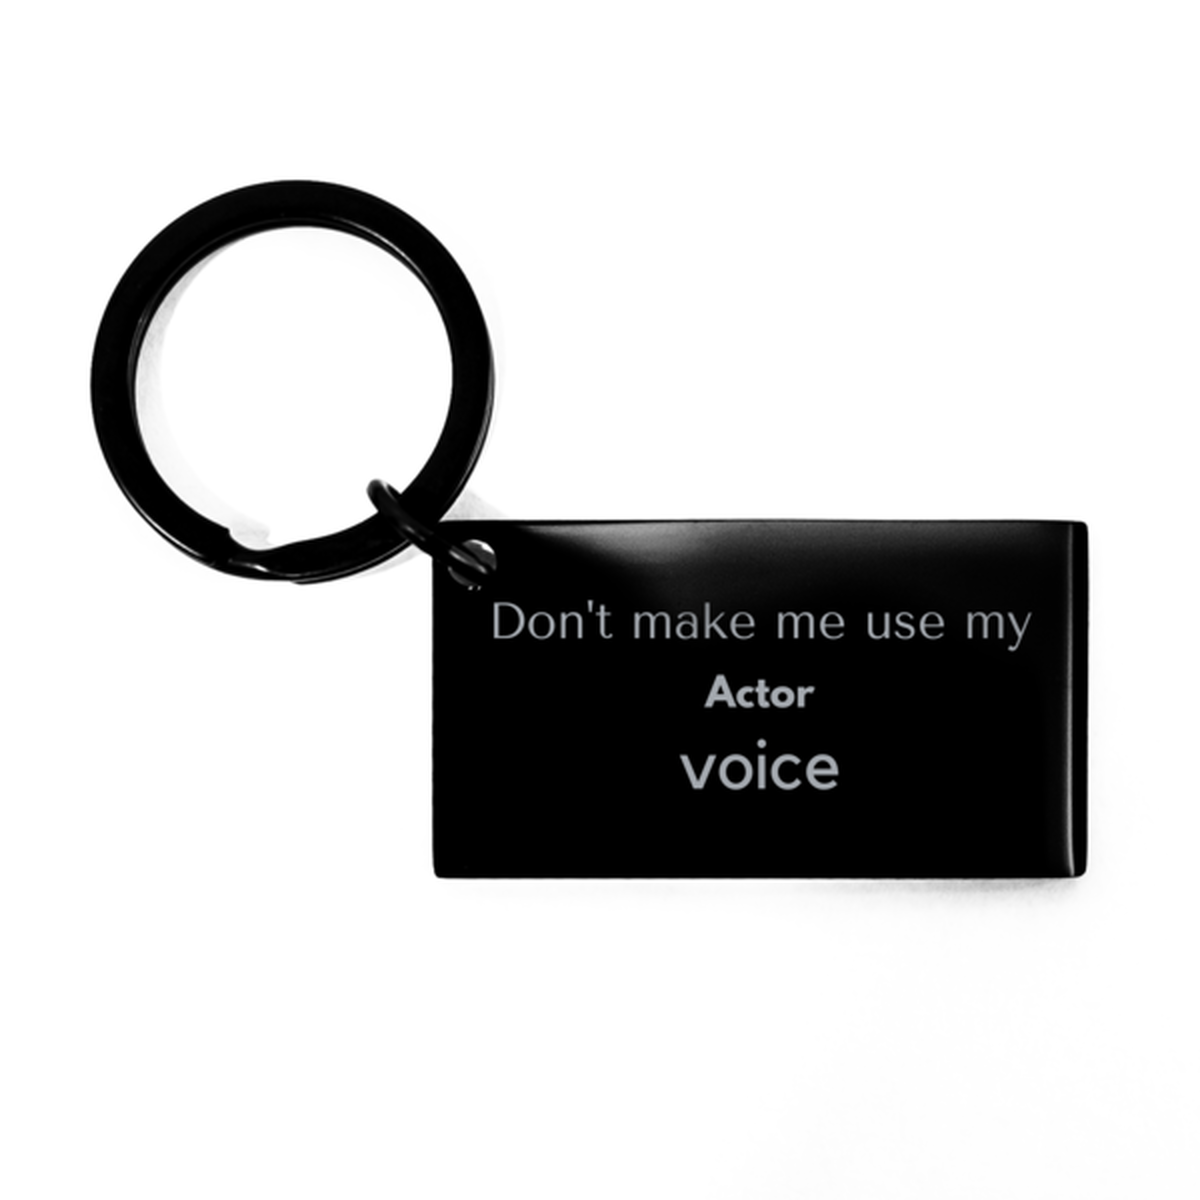 Don't make me use my Actor voice, Sarcasm Actor Gifts, Christmas Actor Keychain Birthday Unique Gifts For Actor Coworkers, Men, Women, Colleague, Friends